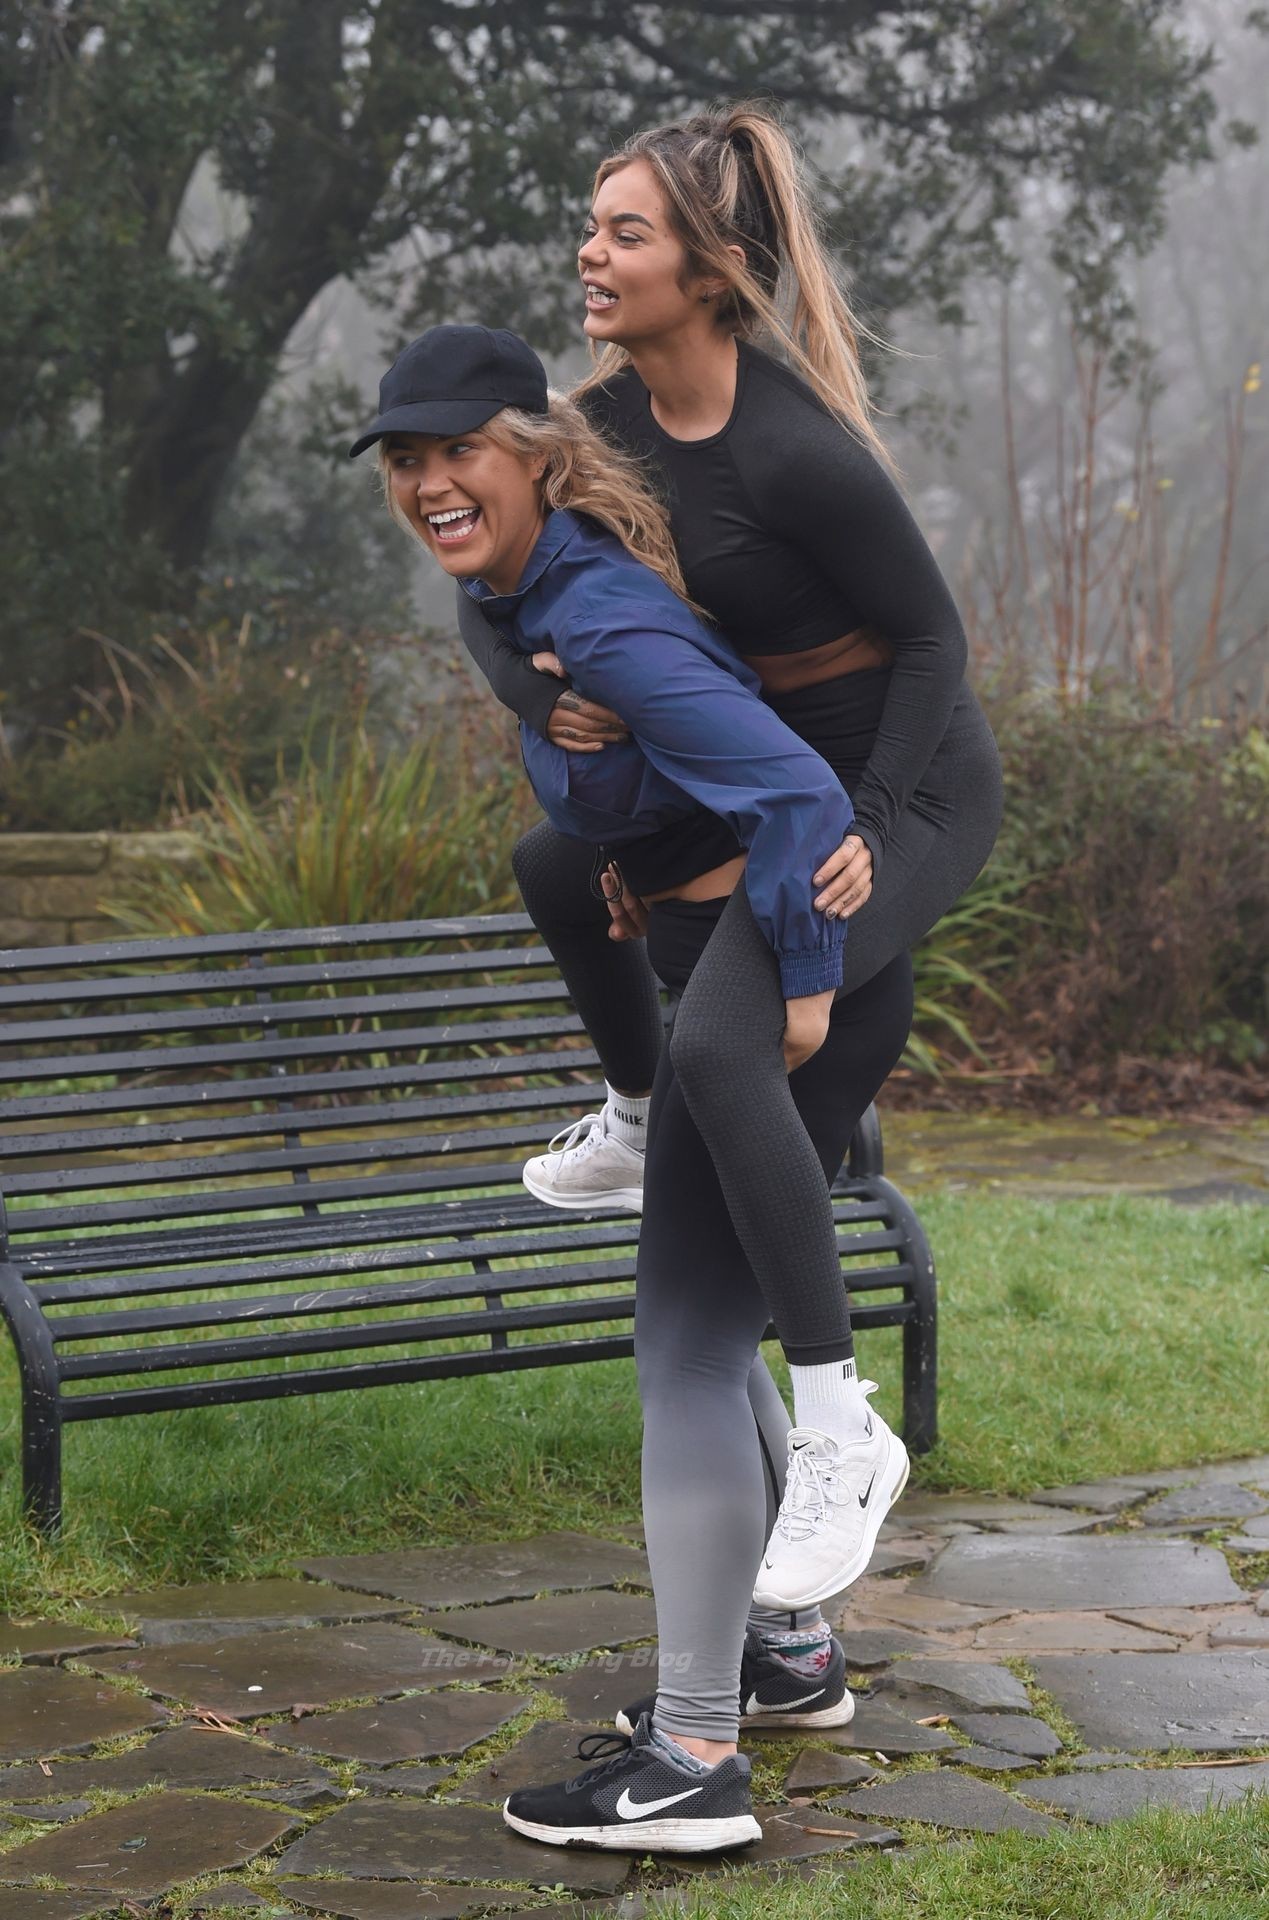 Lesbians Sarah Hutchinson & Charlotte Taundry are Seen in a Park (32 Photos)